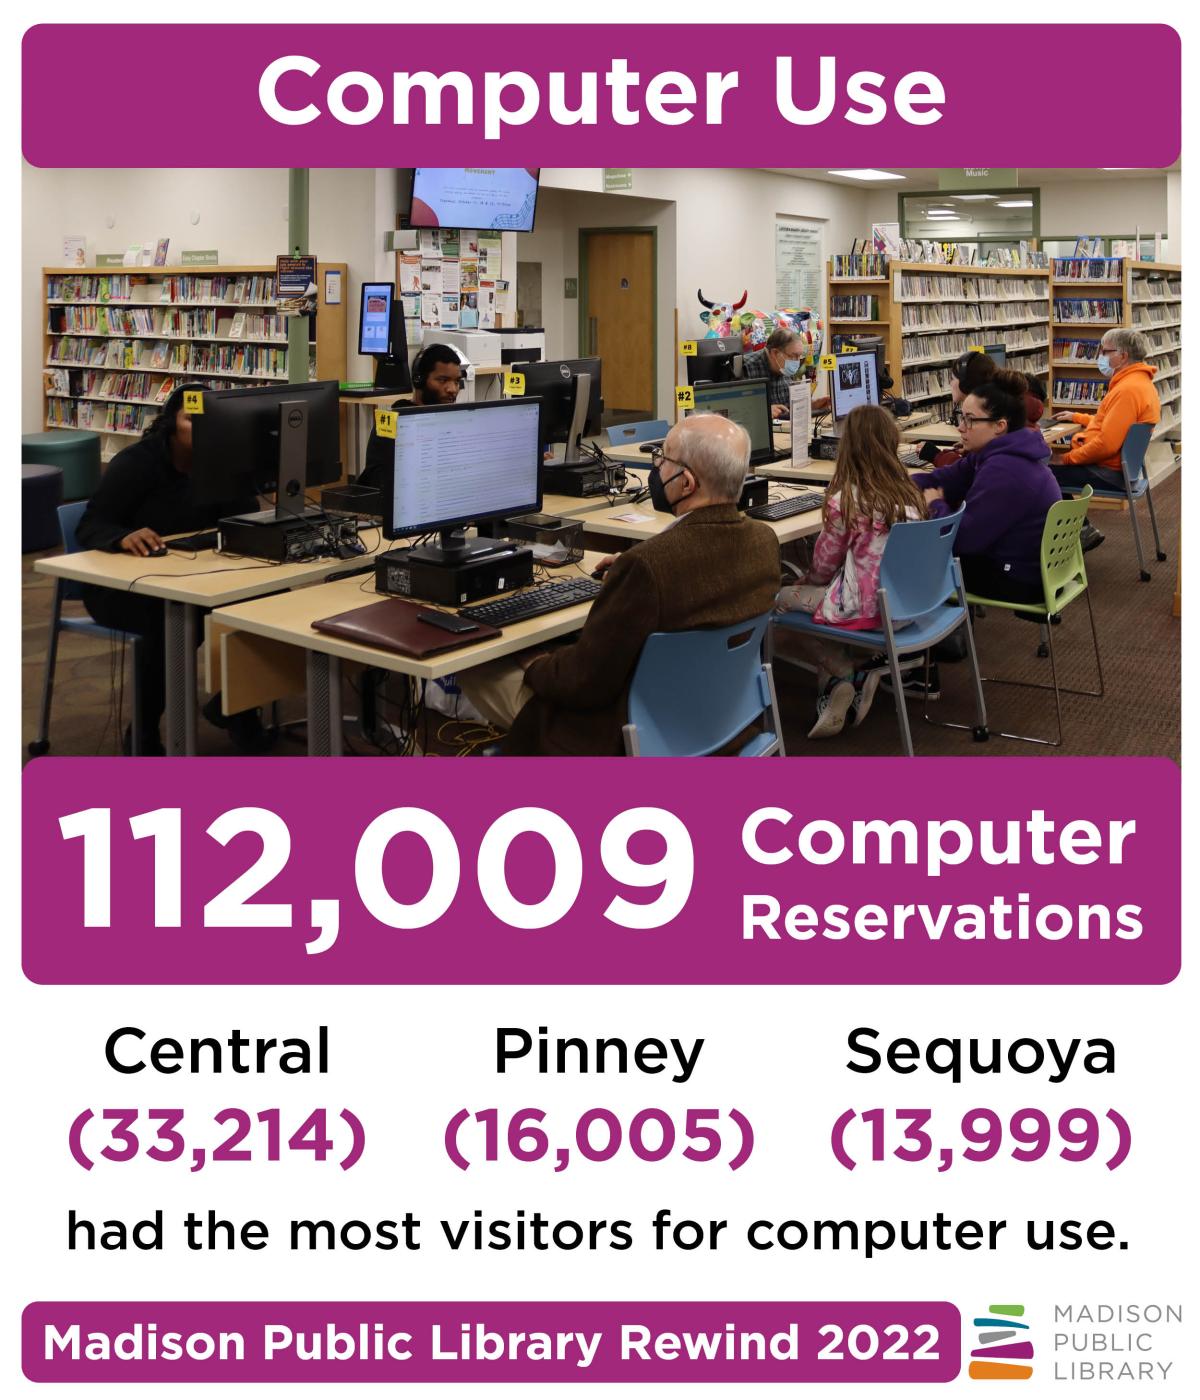 Computer use at Madison Public Library in 2022